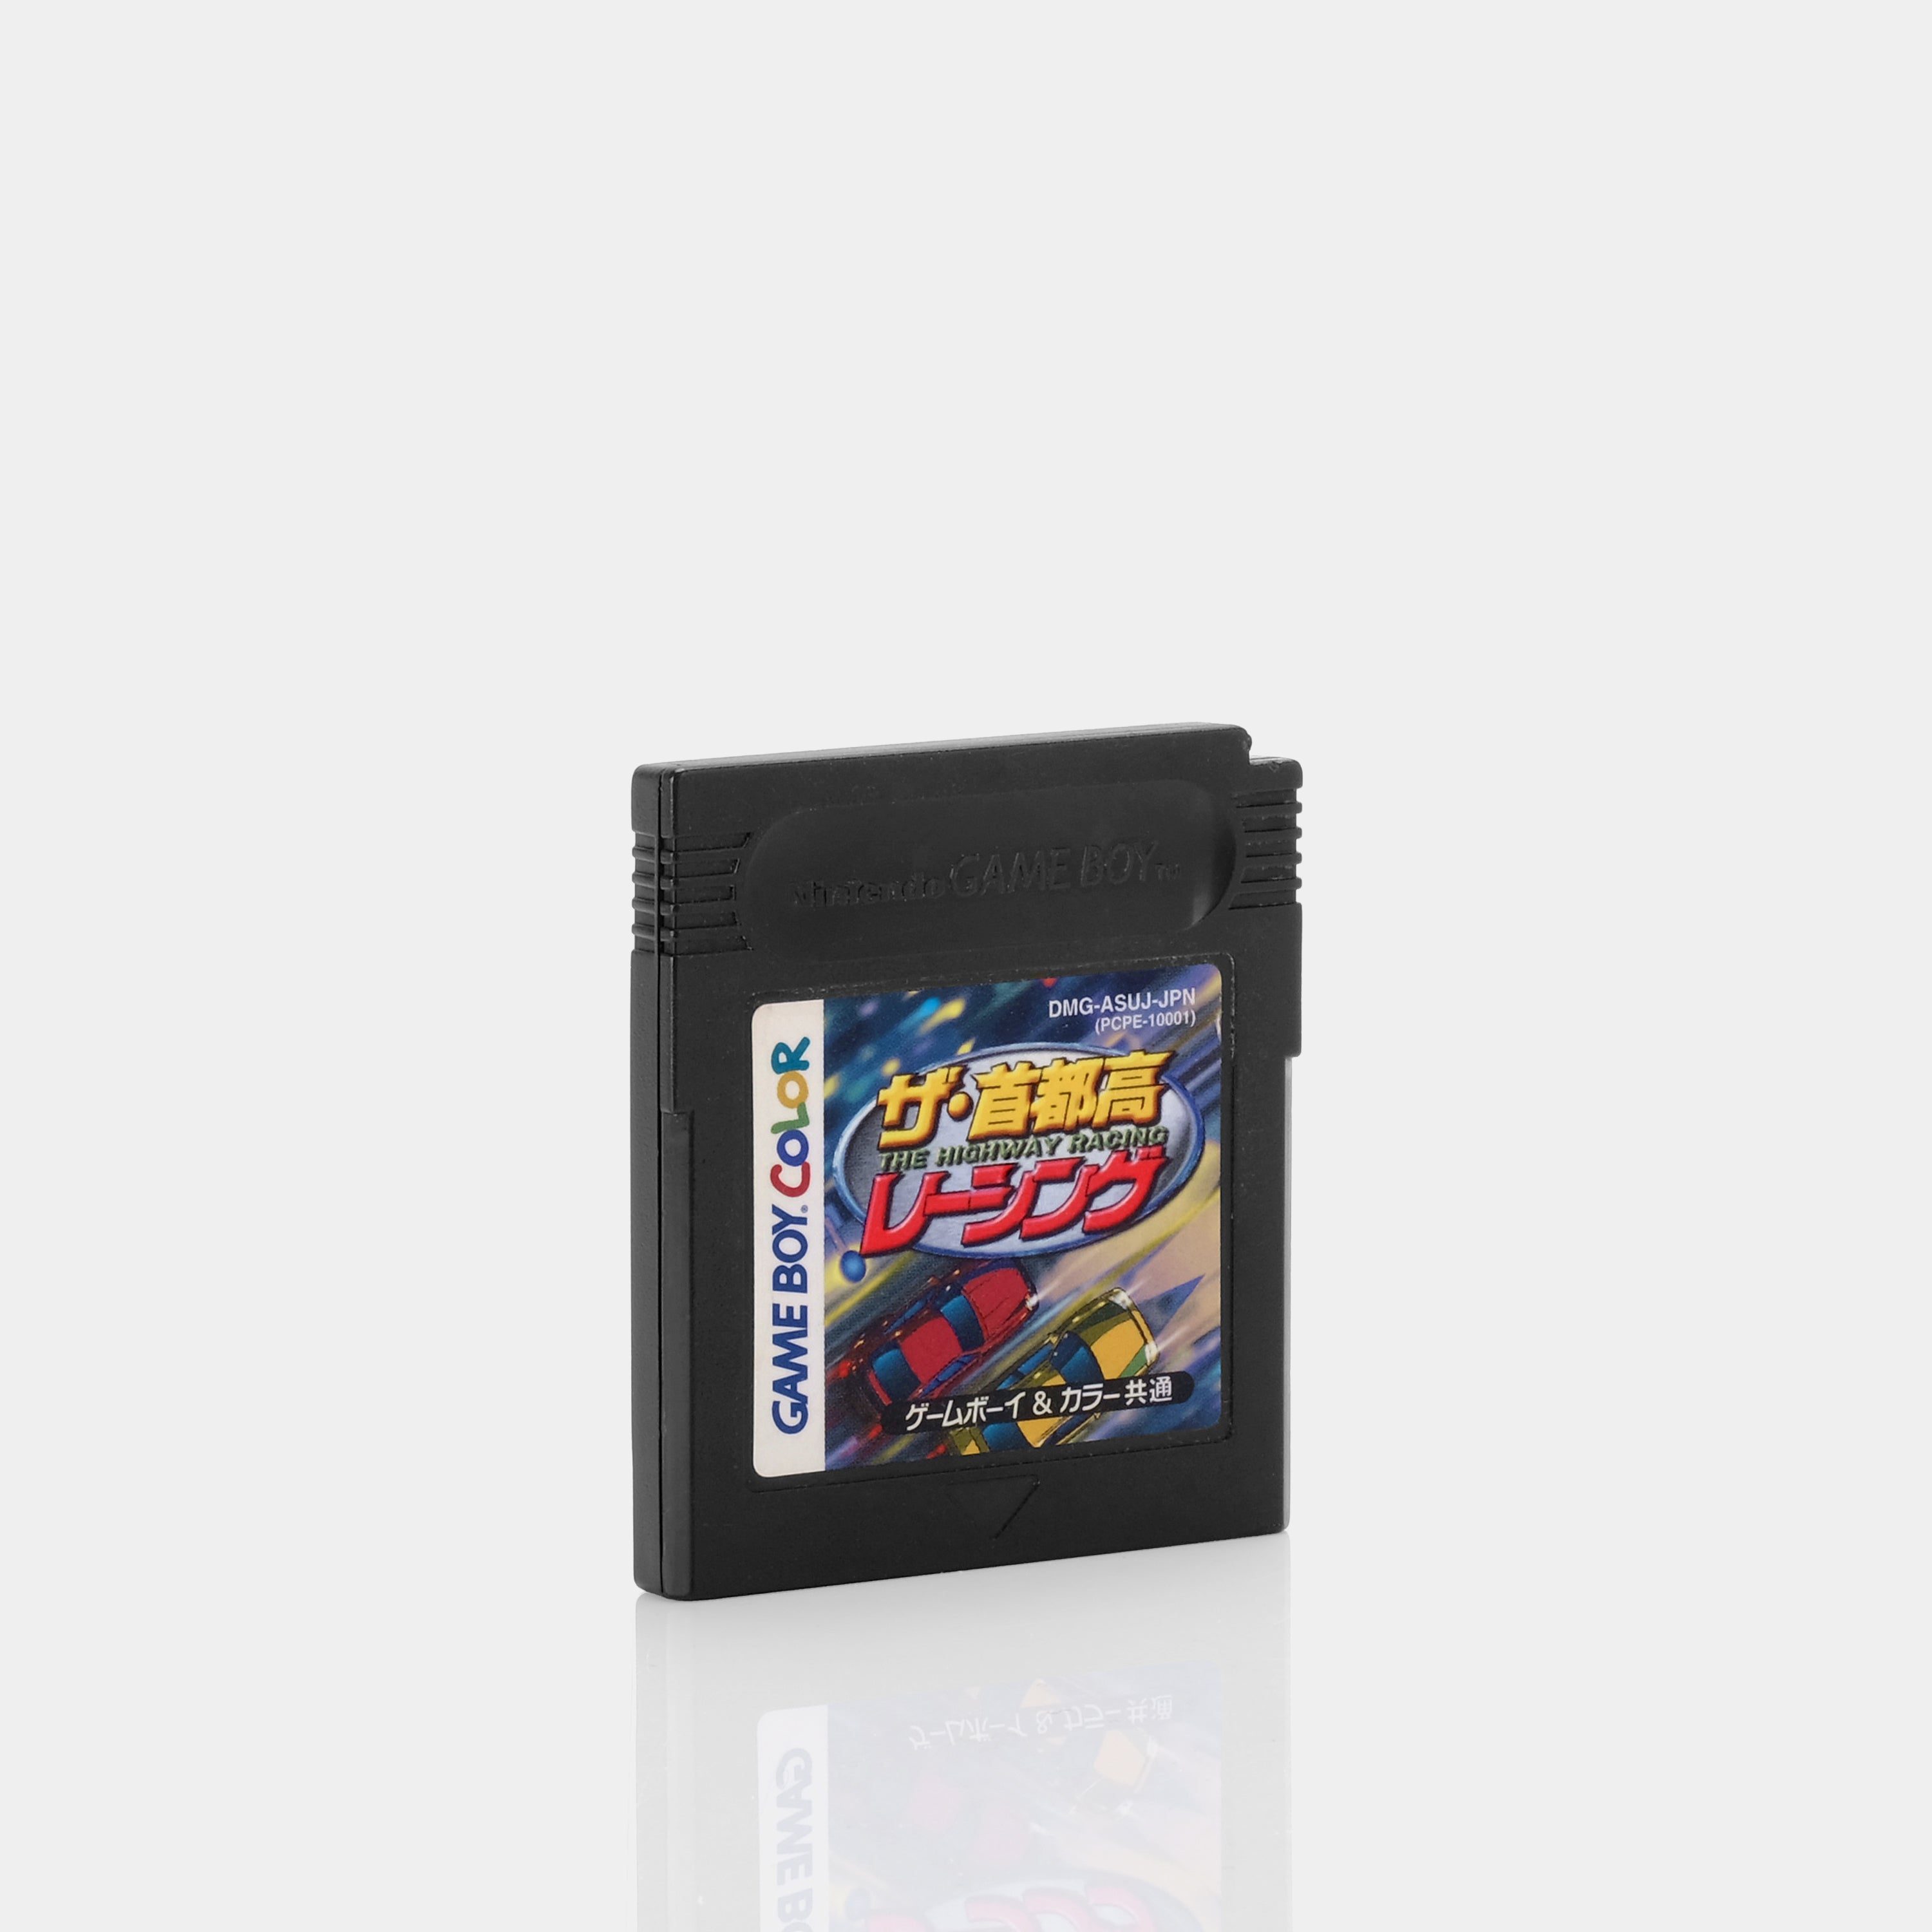 The Highway Racing ザ・首都高レーシング (Japanese Version) Game Boy Color Game